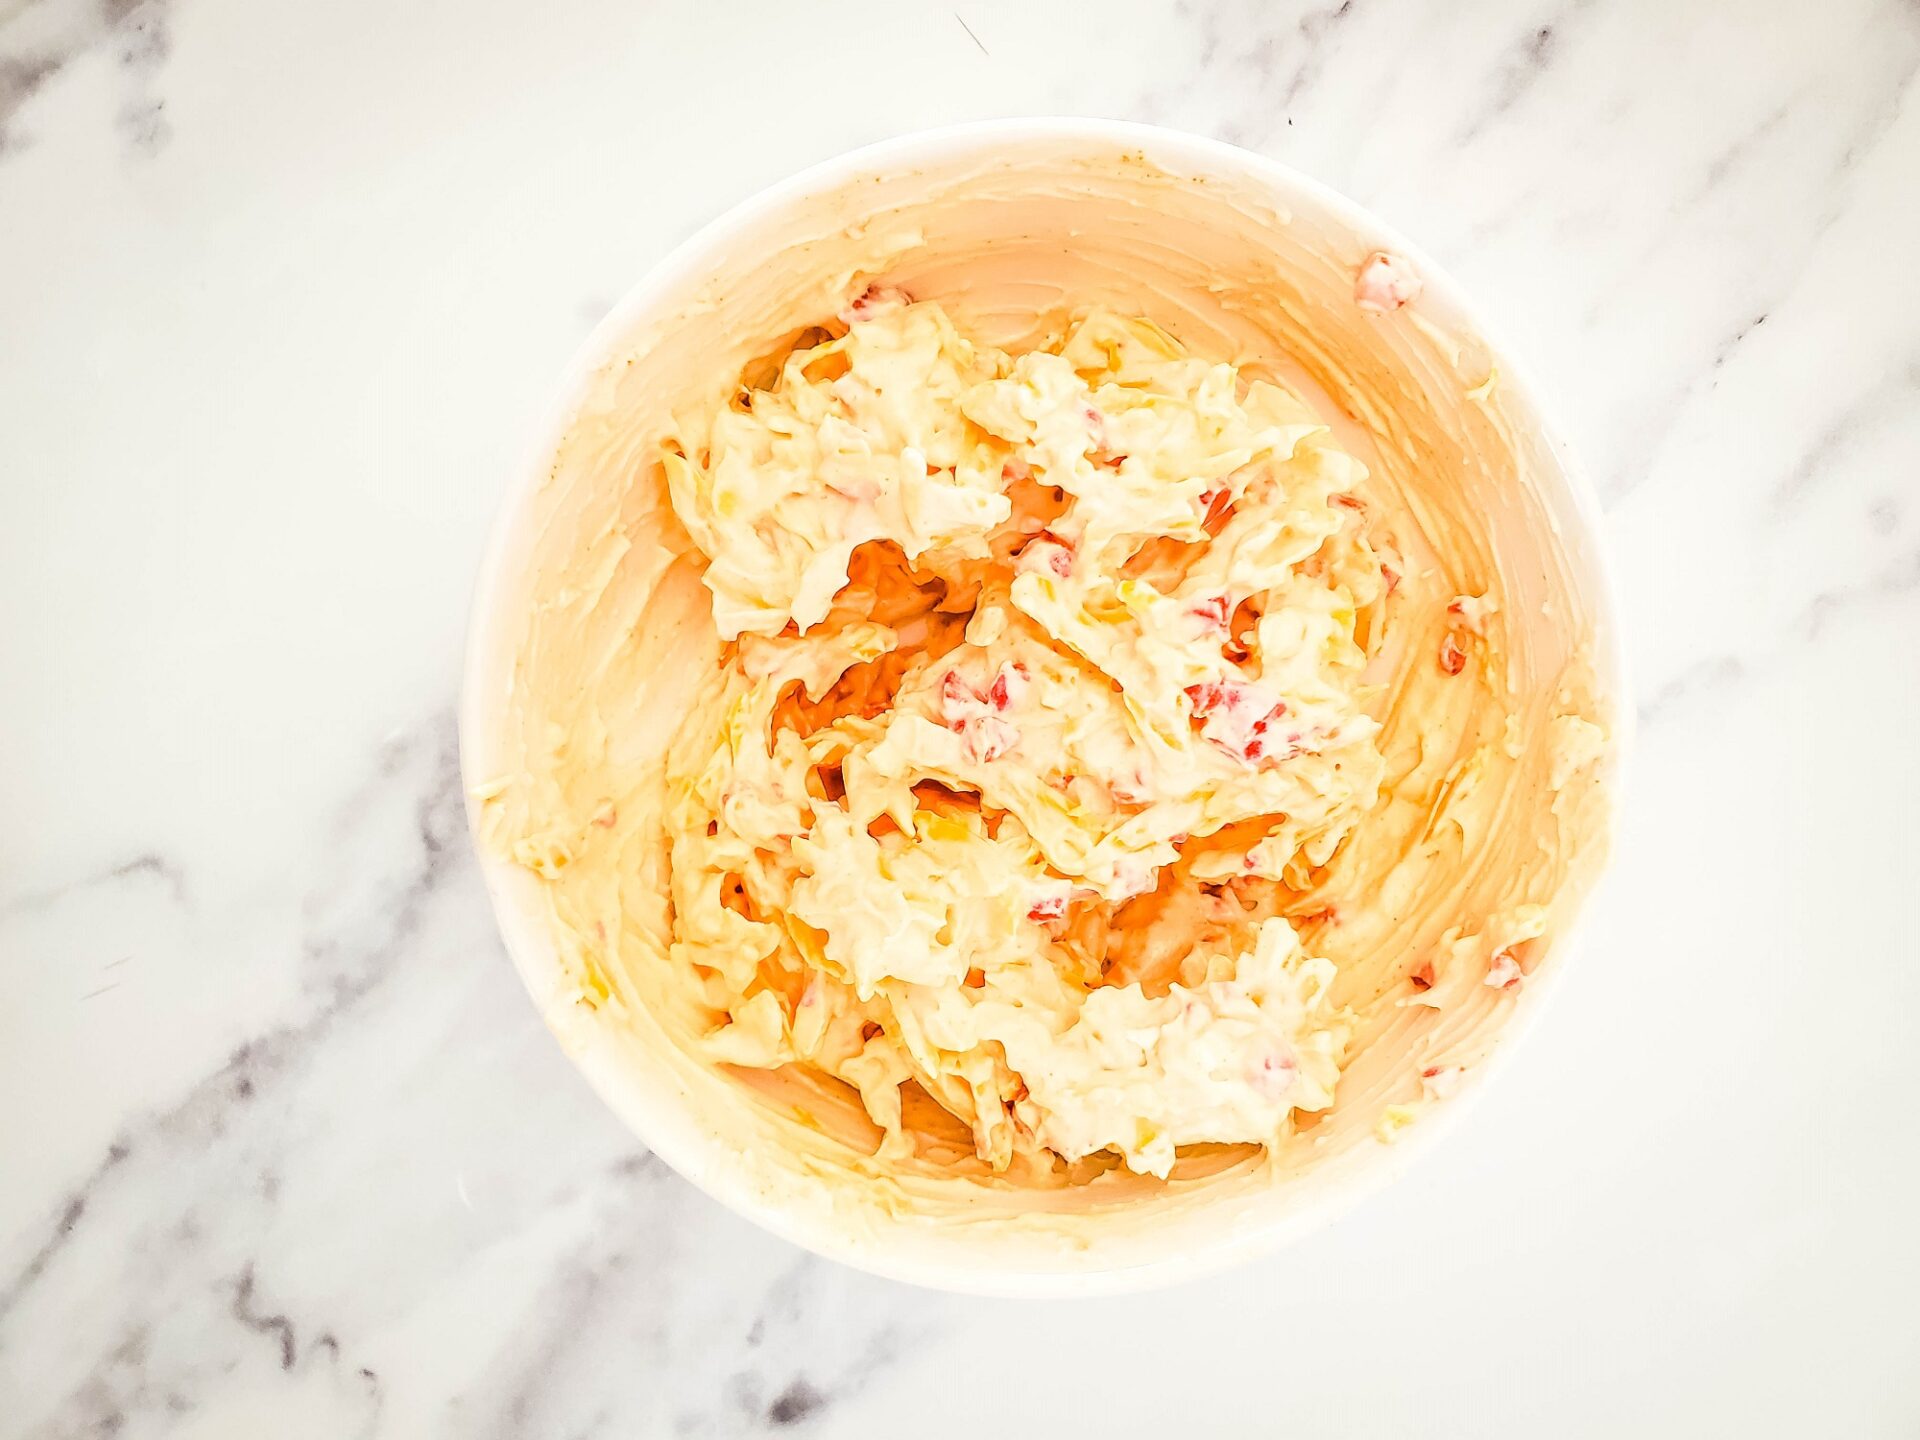 Pimento cheese mixture in a bowl.